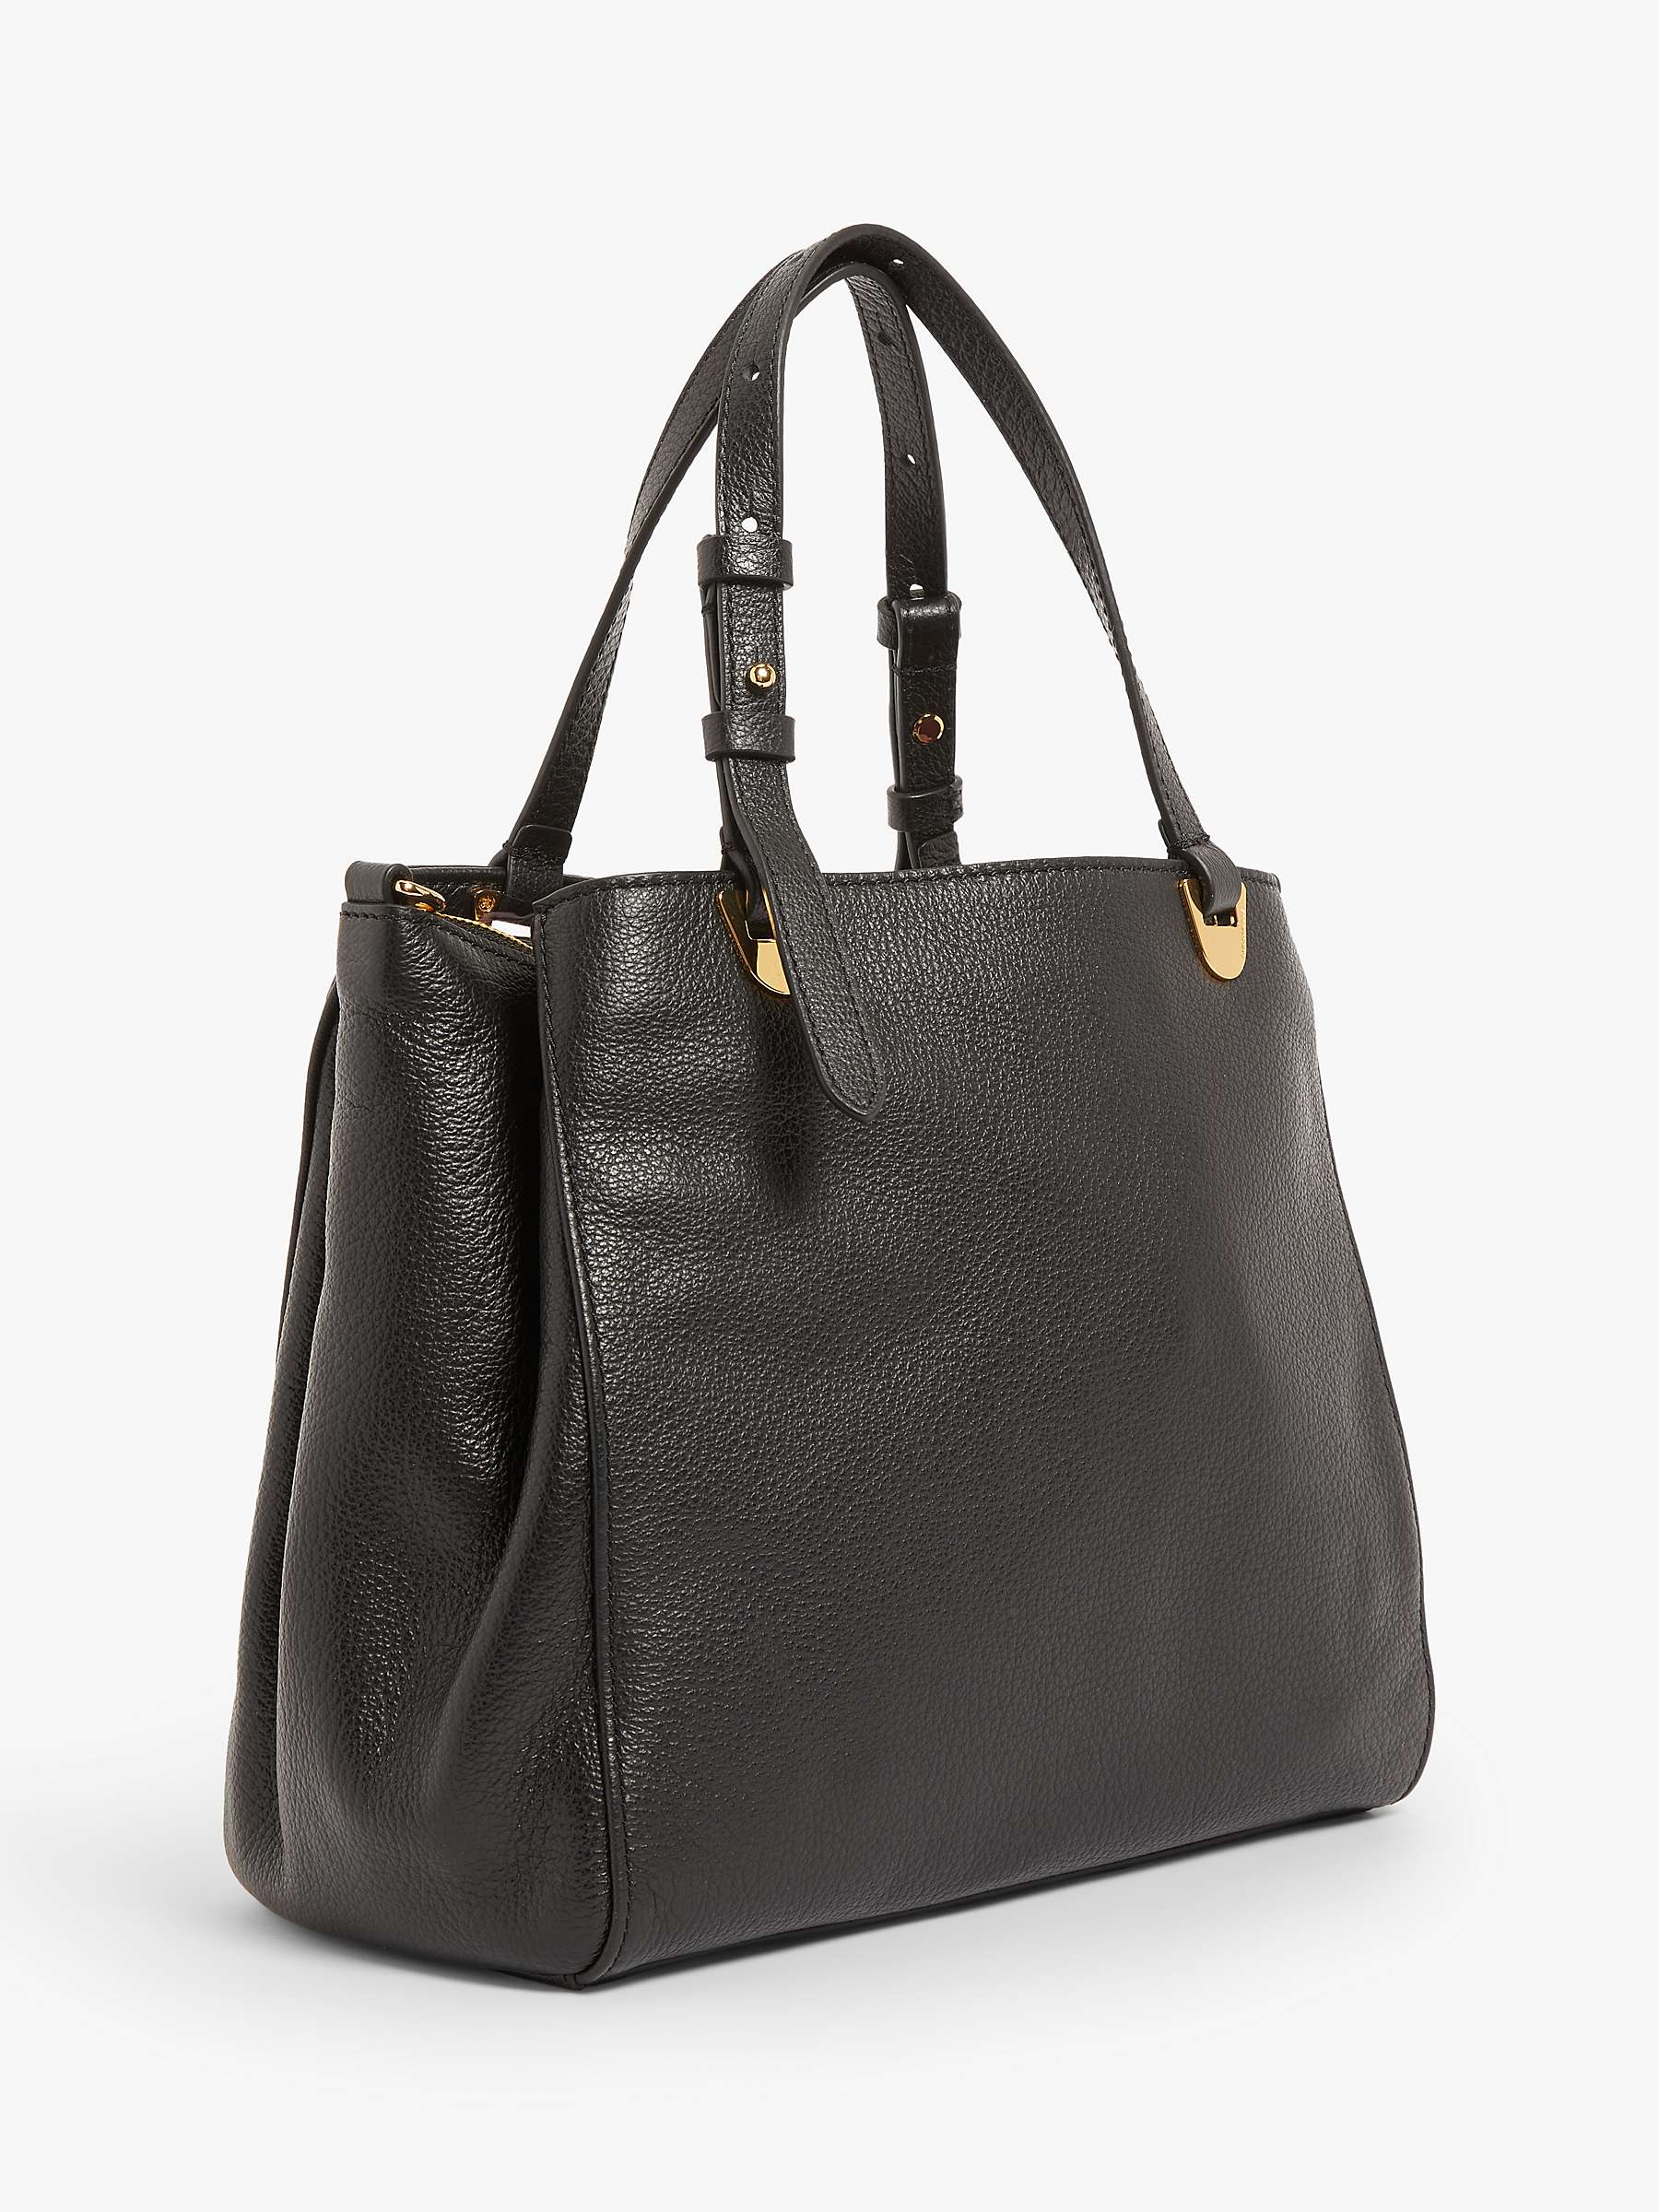 Buy Coccinelle Lea Leather Top Handle Bag Online at johnlewis.com